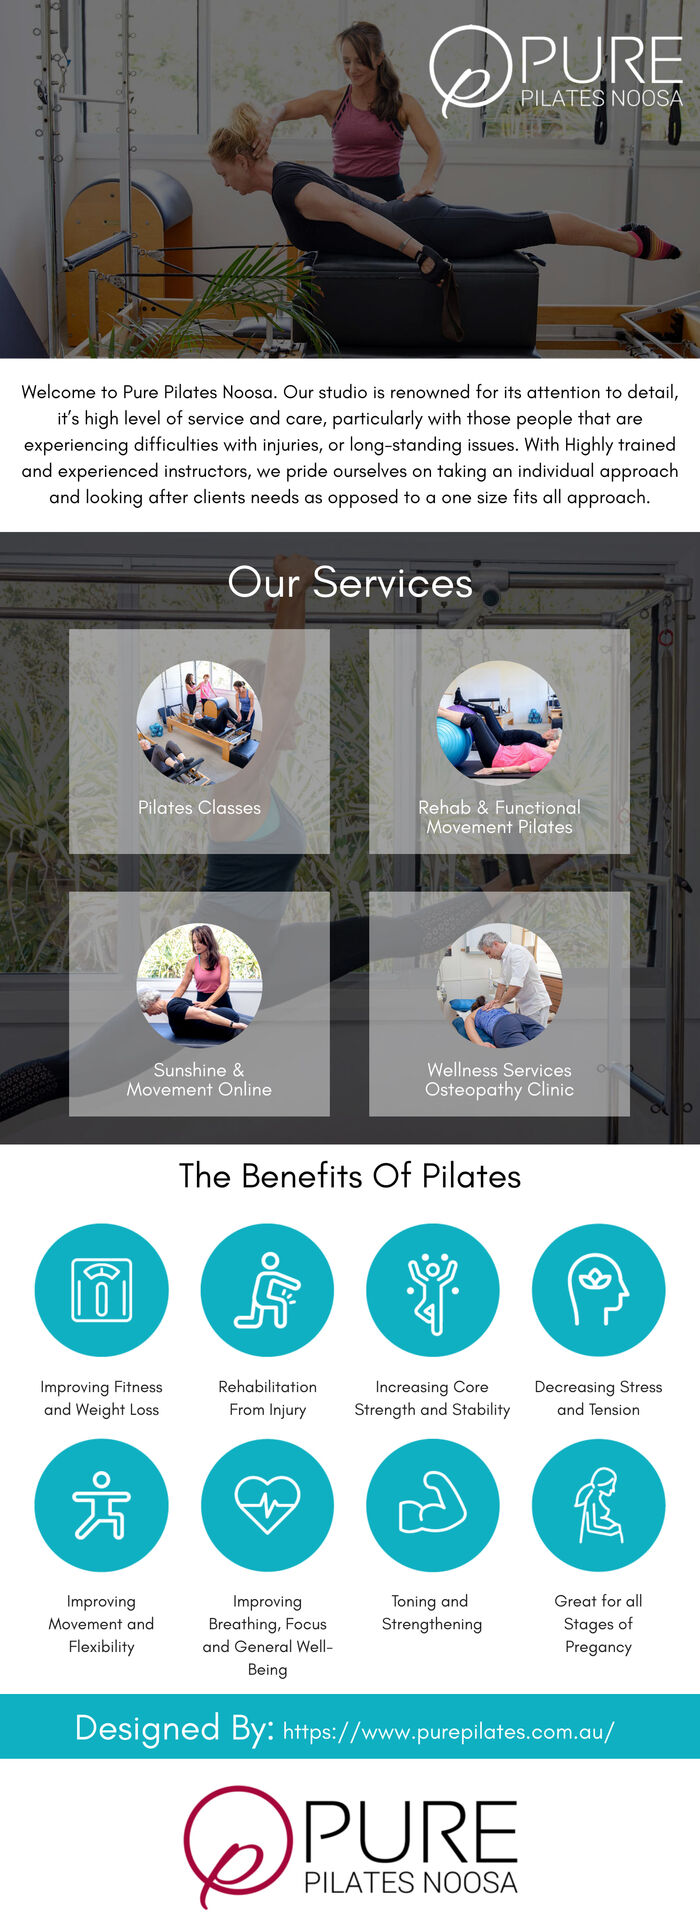 This infographic is designed by Pure Pilates Noosa